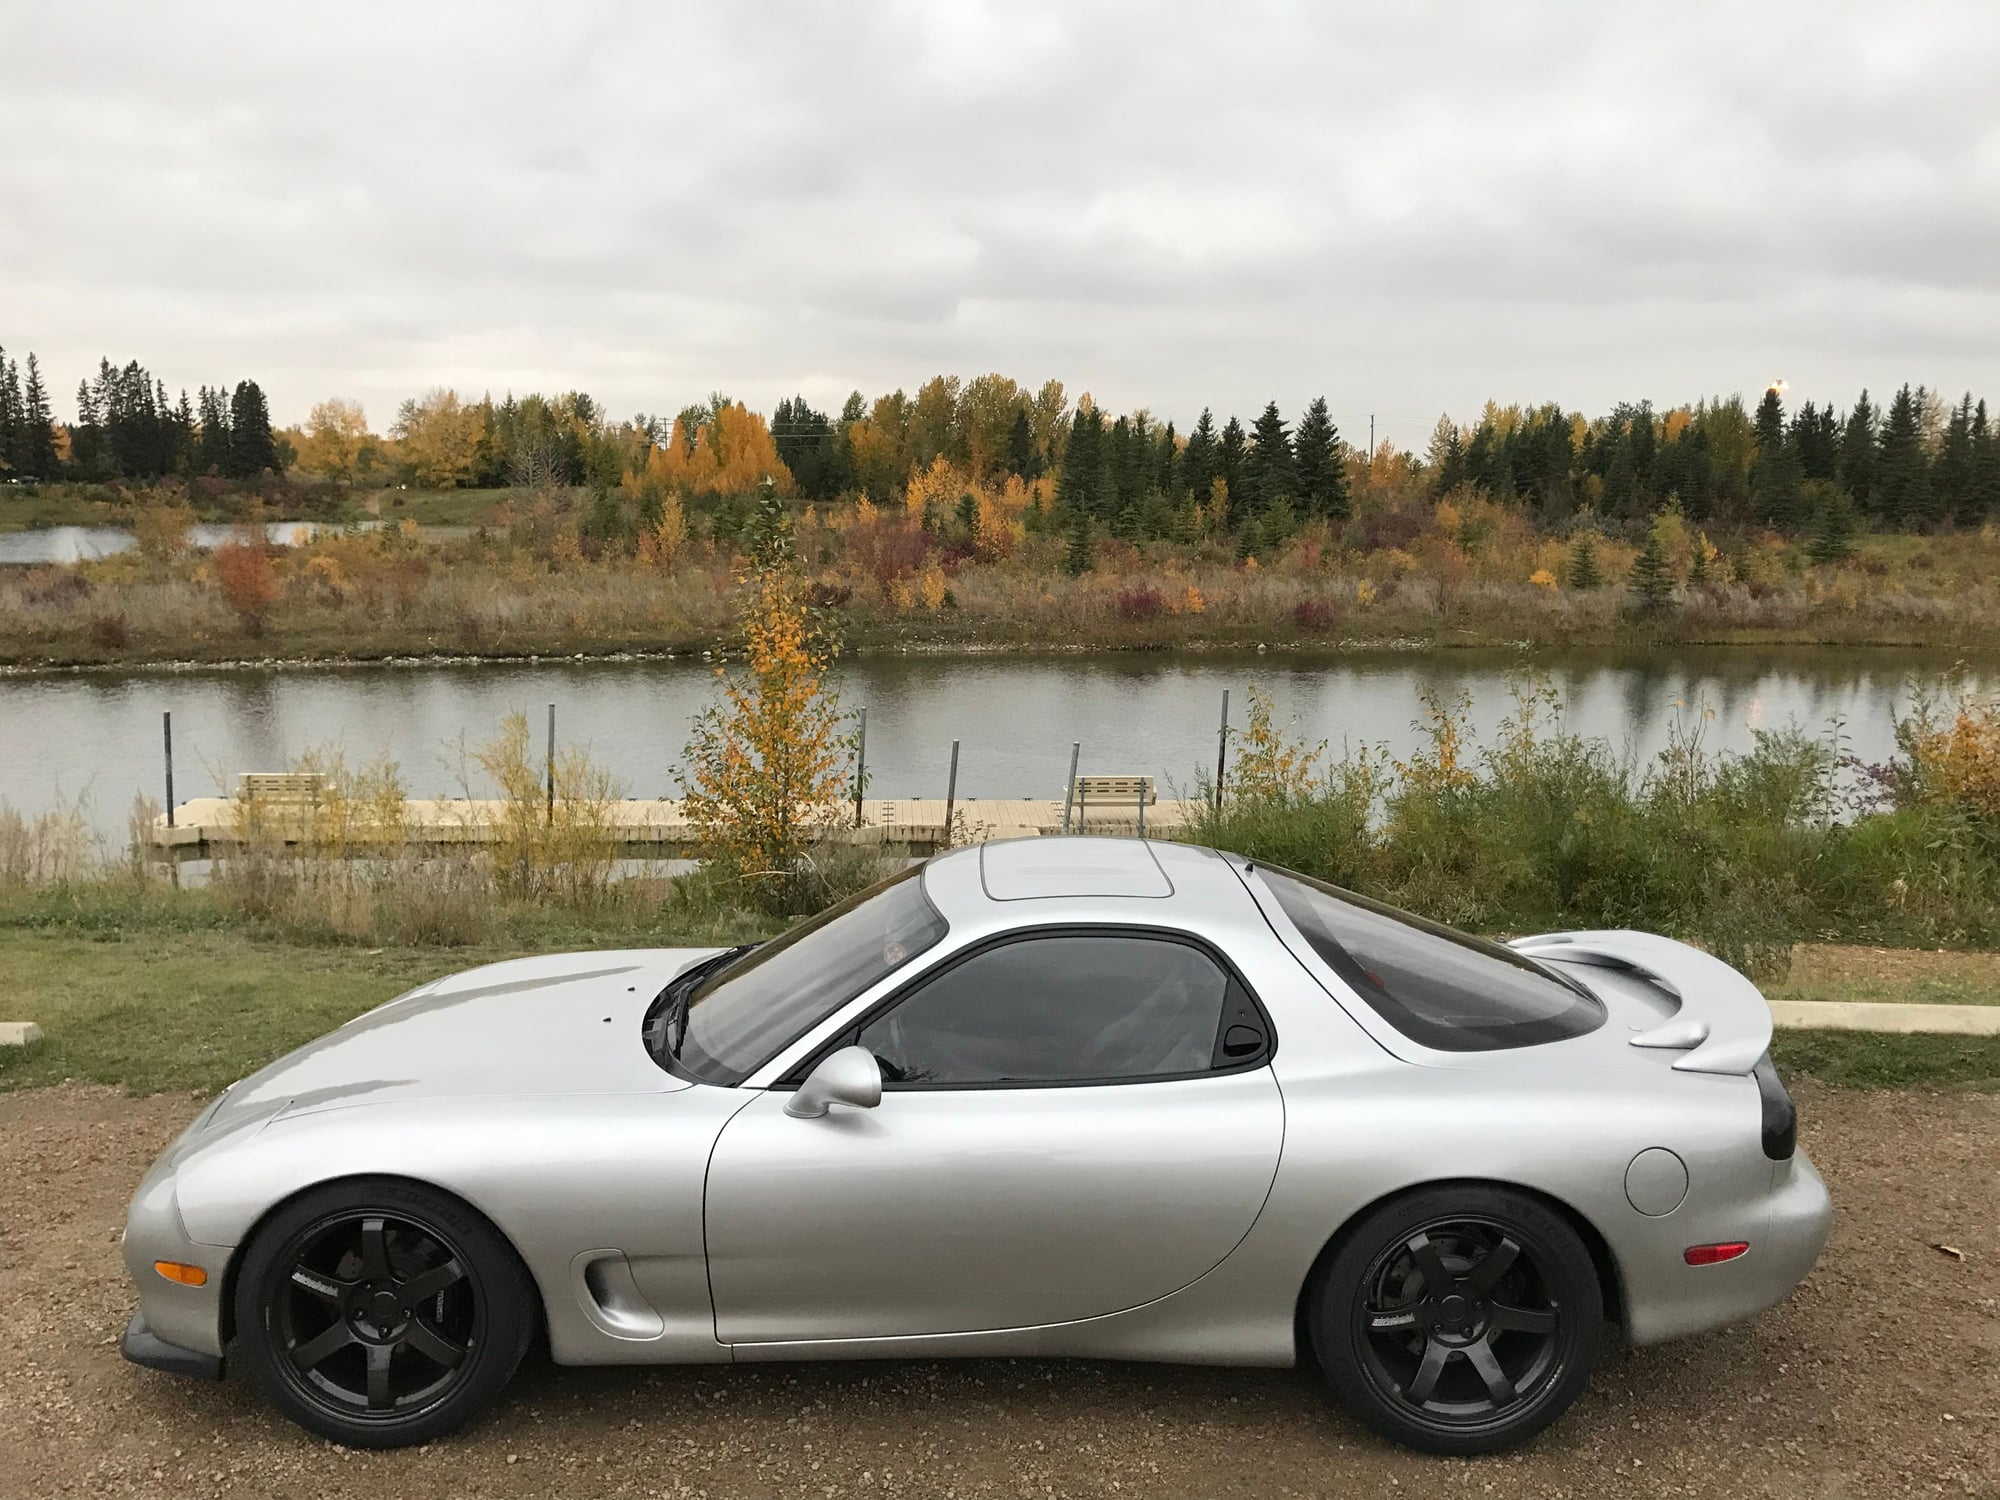 1993 Mazda RX-7 - FS: Canadian - 1993 RX7 Touring - Used - VIN JM1FD3326P0210626 - 61,500 Miles - Other - 2WD - Manual - Hatchback - Silver - Calgary, AB T0M0N0, Canada